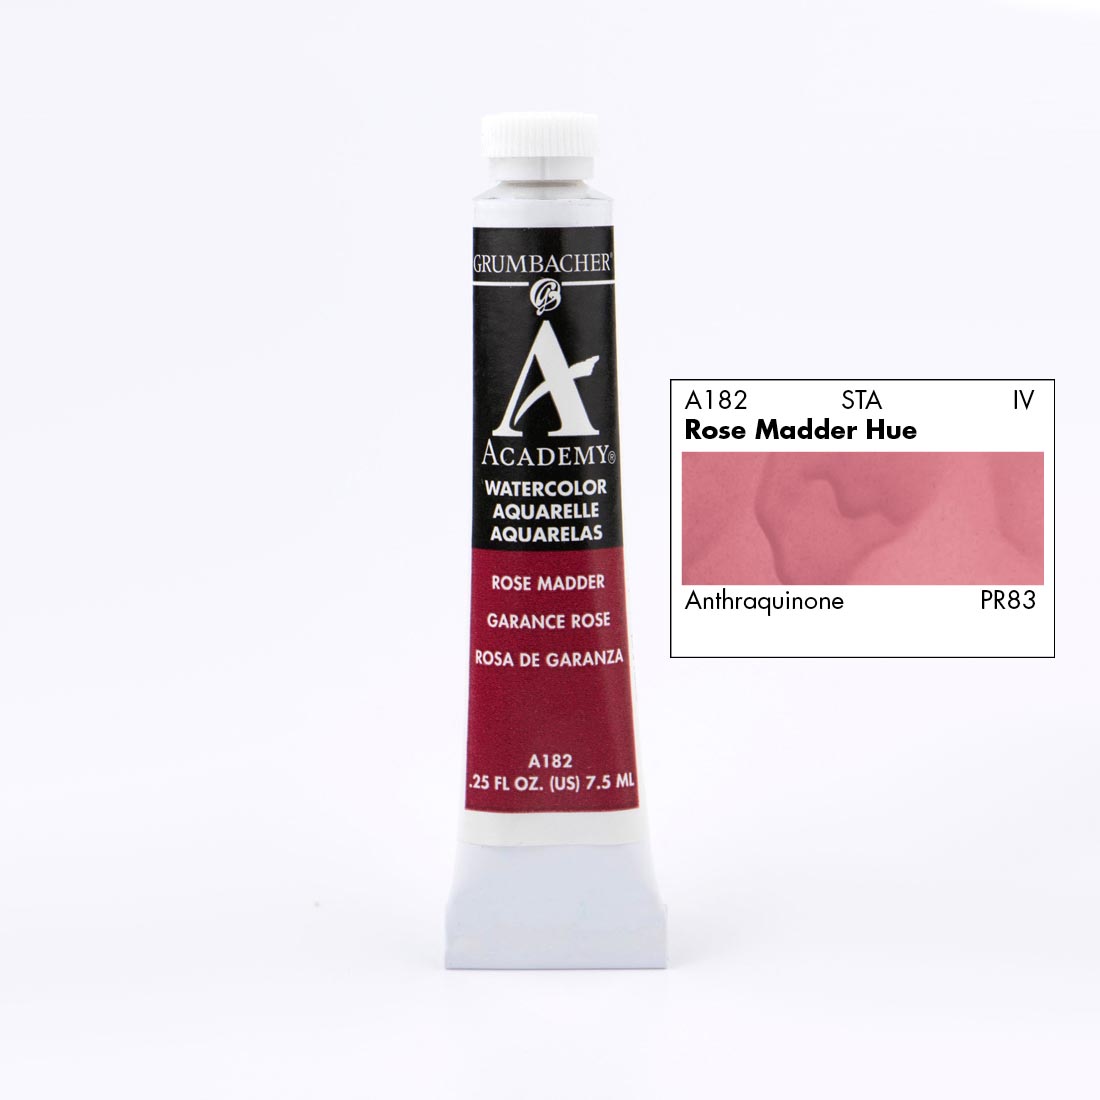 Tube of Grumbacher Academy Watercolor beside Rose Madder Hue color swatch